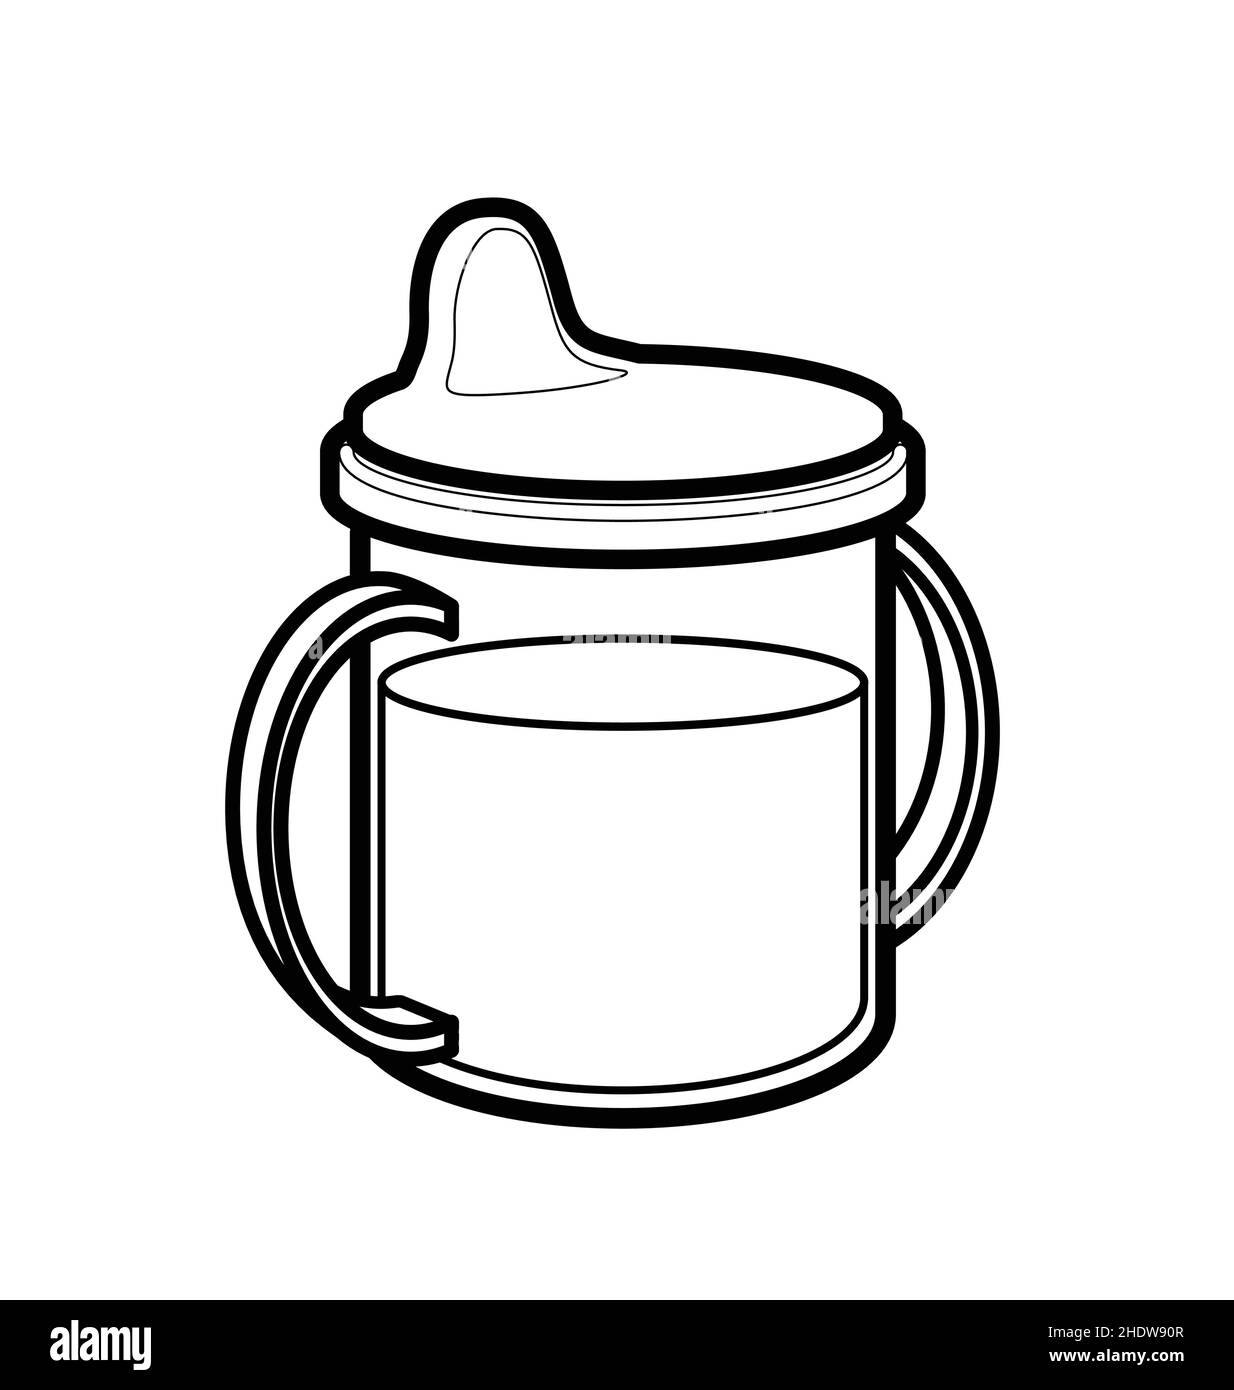 babies baby sippy sipper cup bottle full of milk or formula with 2 handles line drawing black and white lineart vector isolated on white background Stock Vector